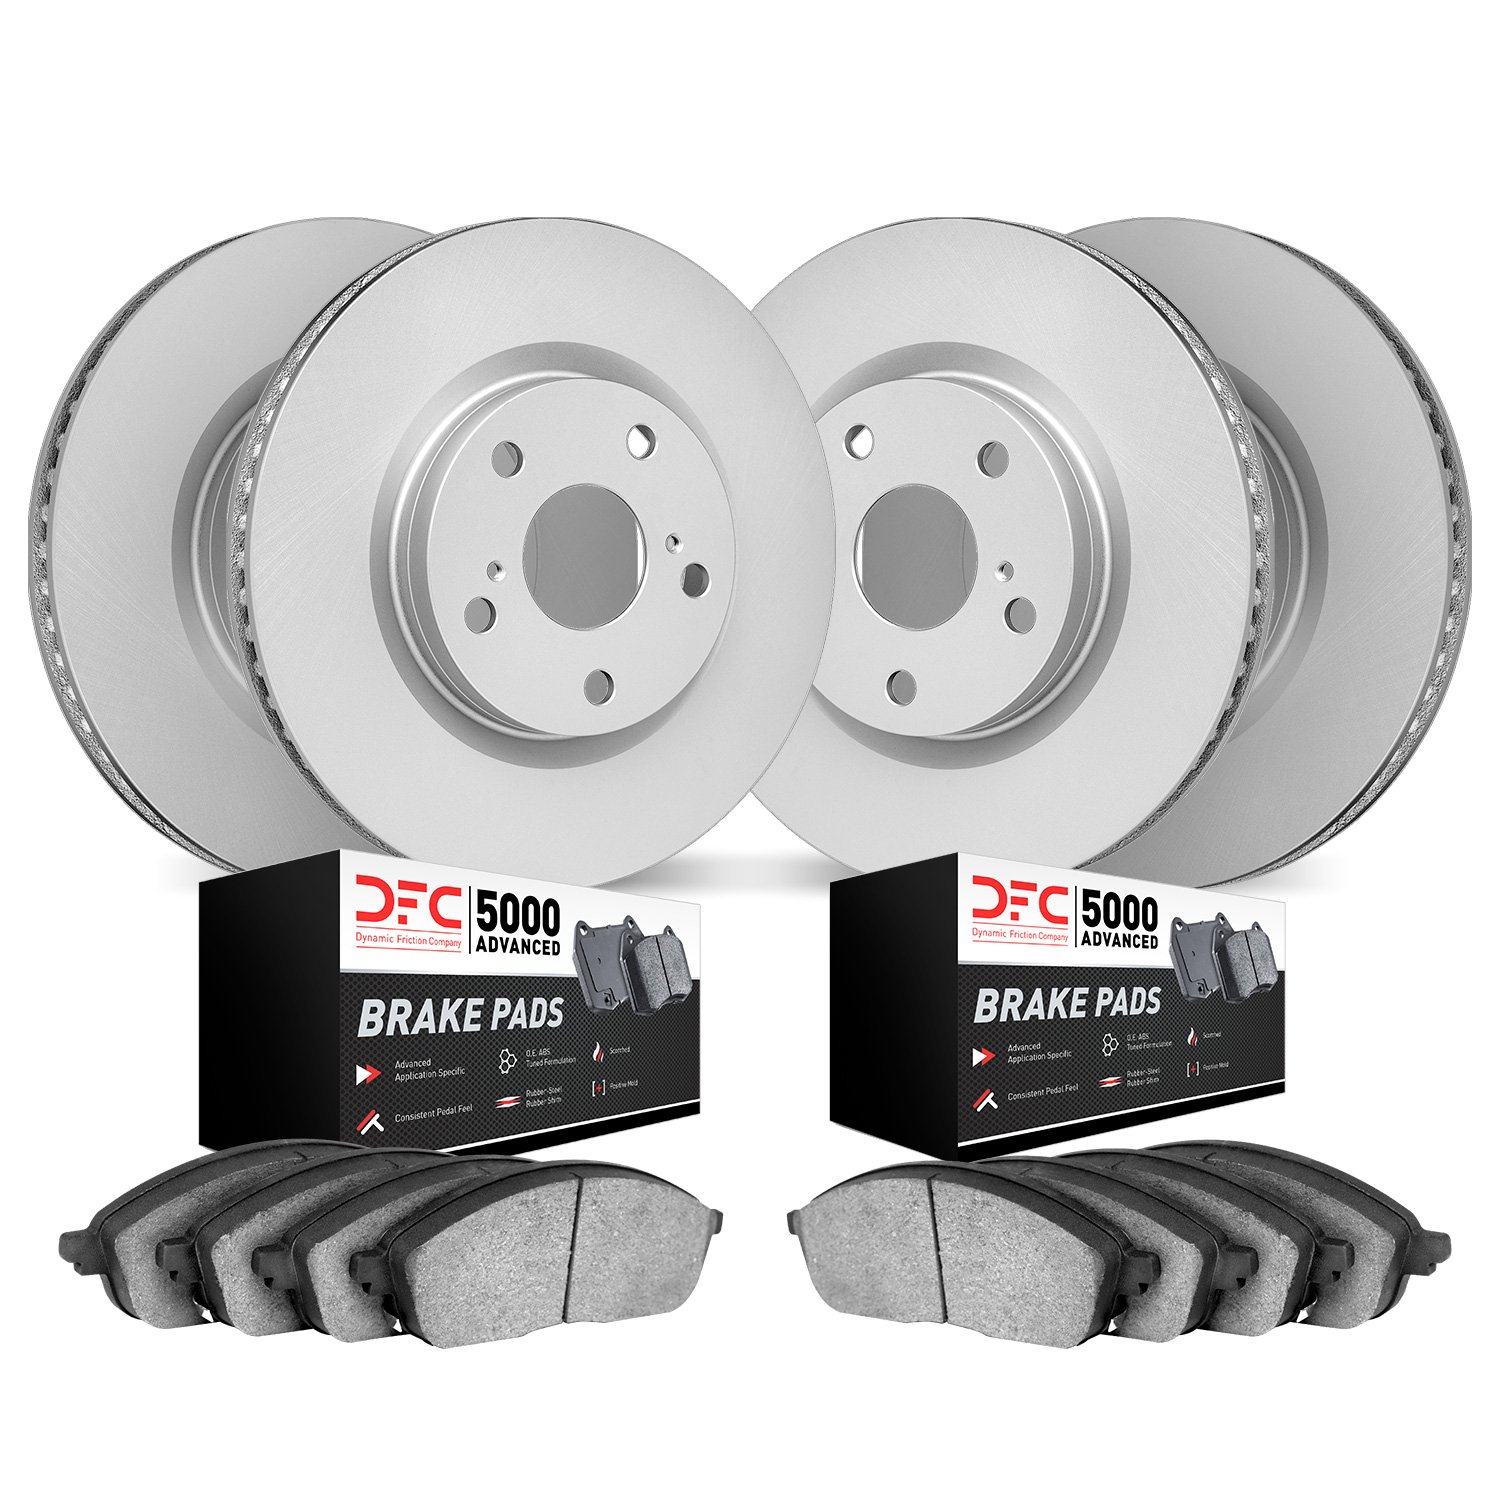 4504-27046 Geospec Brake Rotors w/5000 Advanced Brake Pads Kit, 2003-2014 Volvo, Position: Front and Rear